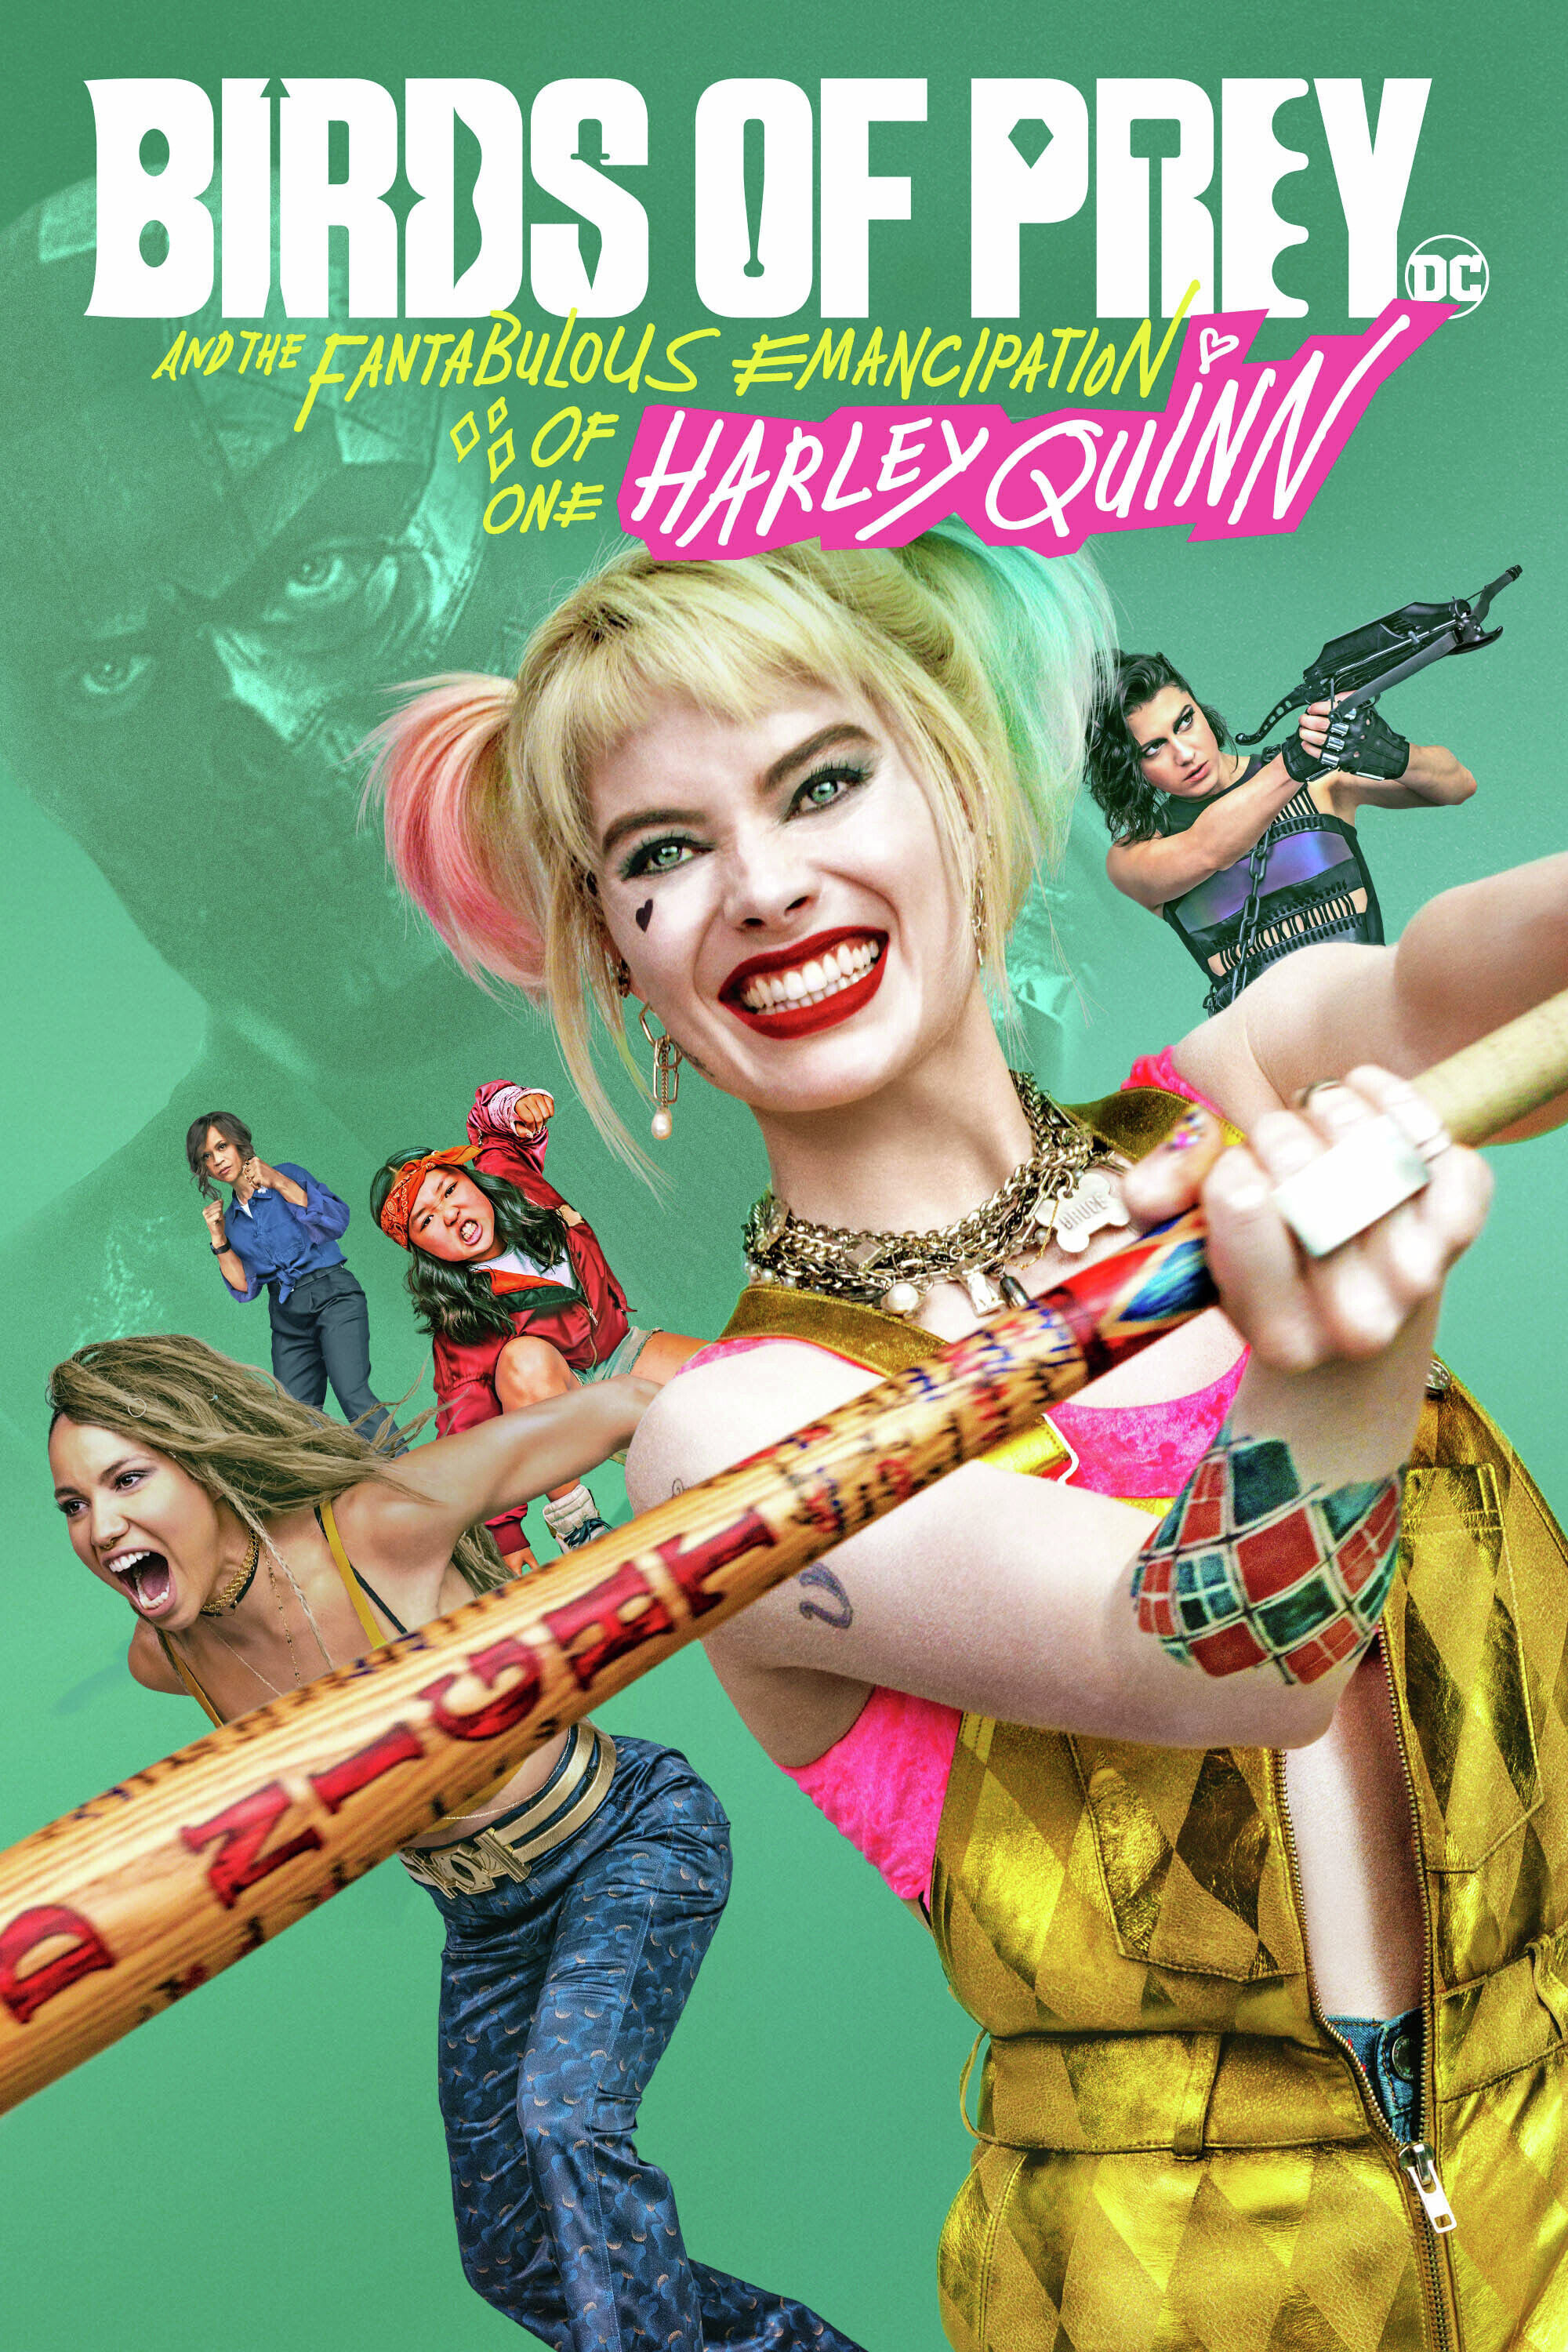  Birds of Prey (And the Fantabulous Emancipation of One Harley  Quinn) (Original Motion Picture Soundtrack): CDs & Vinyl